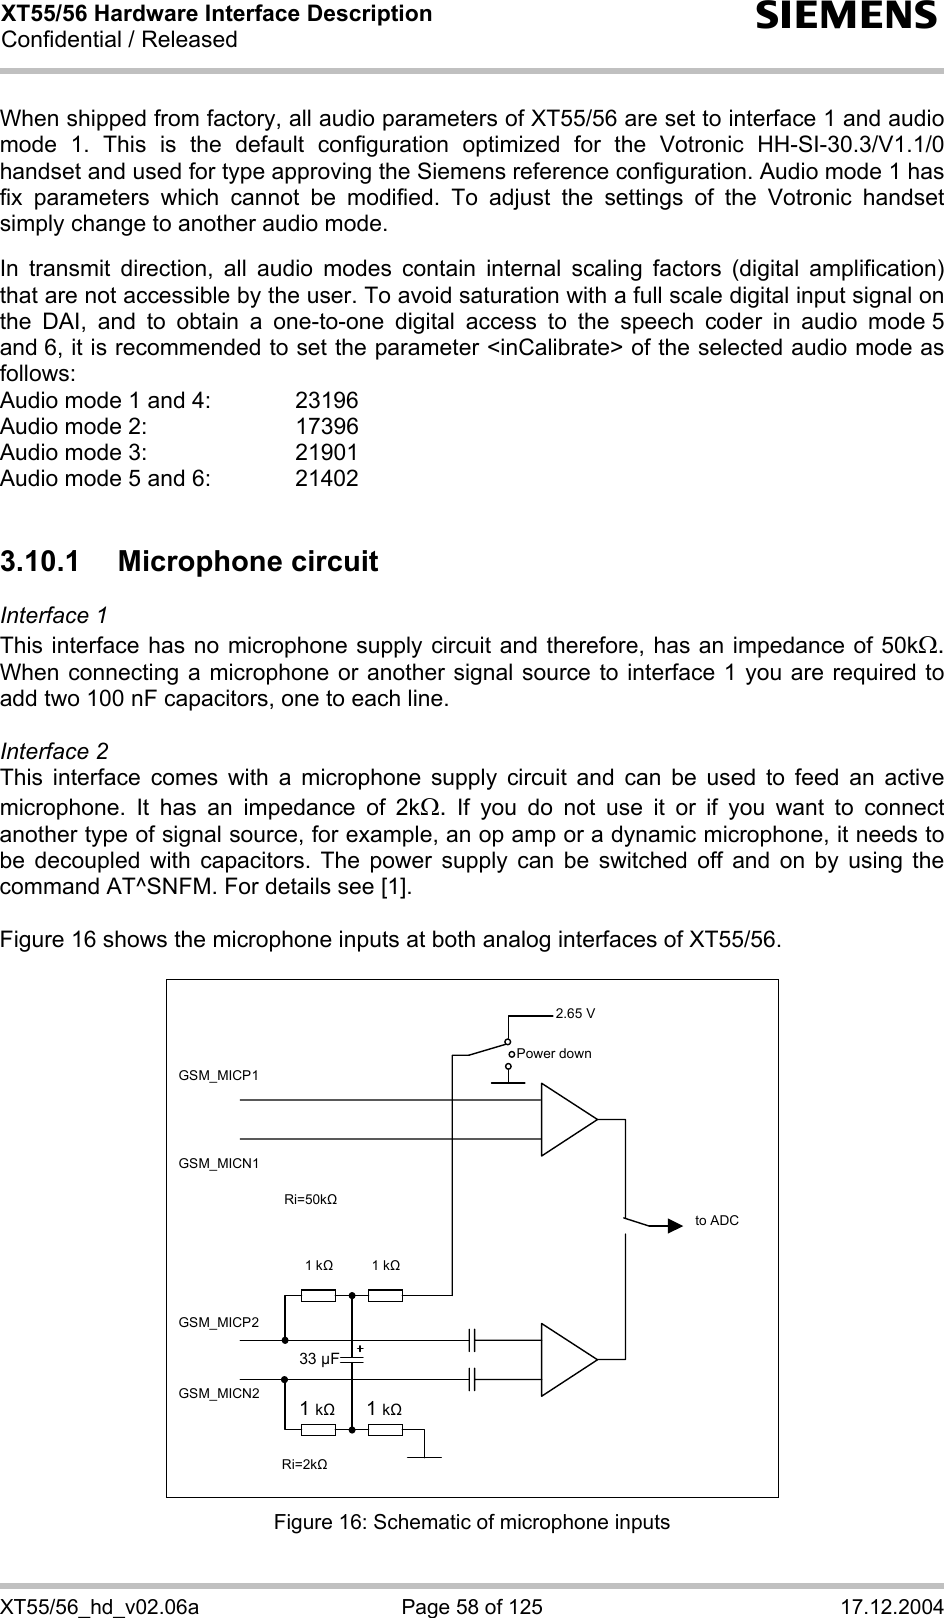 XT55/56 Hardware Interface Description Confidential / Released s XT55/56_hd_v02.06a  Page 58 of 125  17.12.2004  When shipped from factory, all audio parameters of XT55/56 are set to interface 1 and audio mode 1. This is the default configuration optimized for the Votronic HH-SI-30.3/V1.1/0 handset and used for type approving the Siemens reference configuration. Audio mode 1 has fix parameters which cannot be modified. To adjust the settings of the Votronic handset simply change to another audio mode.  In transmit direction, all audio modes contain internal scaling factors (digital amplification) that are not accessible by the user. To avoid saturation with a full scale digital input signal on the DAI, and to obtain a one-to-one digital access to the speech coder in audio mode 5 and 6, it is recommended to set the parameter &lt;inCalibrate&gt; of the selected audio mode as follows: Audio mode 1 and 4:    23196 Audio mode 2:     17396 Audio mode 3:    21901 Audio mode 5 and 6:    21402  3.10.1 Microphone circuit Interface 1  This interface has no microphone supply circuit and therefore, has an impedance of 50kΩ. When connecting a microphone or another signal source to interface 1 you are required to add two 100 nF capacitors, one to each line.   Interface 2 This interface comes with a microphone supply circuit and can be used to feed an active microphone. It has an impedance of 2kΩ. If you do not use it or if you want to connect another type of signal source, for example, an op amp or a dynamic microphone, it needs to be decoupled with capacitors. The power supply can be switched off and on by using the command AT^SNFM. For details see [1].  Figure 16 shows the microphone inputs at both analog interfaces of XT55/56.    2.65 V to ADC Power down GSM_MICP1 GSM_MICN1 GSM_MICP2 GSM_MICN2 1 k   1 k 1 k 1 k33 µF Ri=50k Ri=2k  Figure 16: Schematic of microphone inputs 